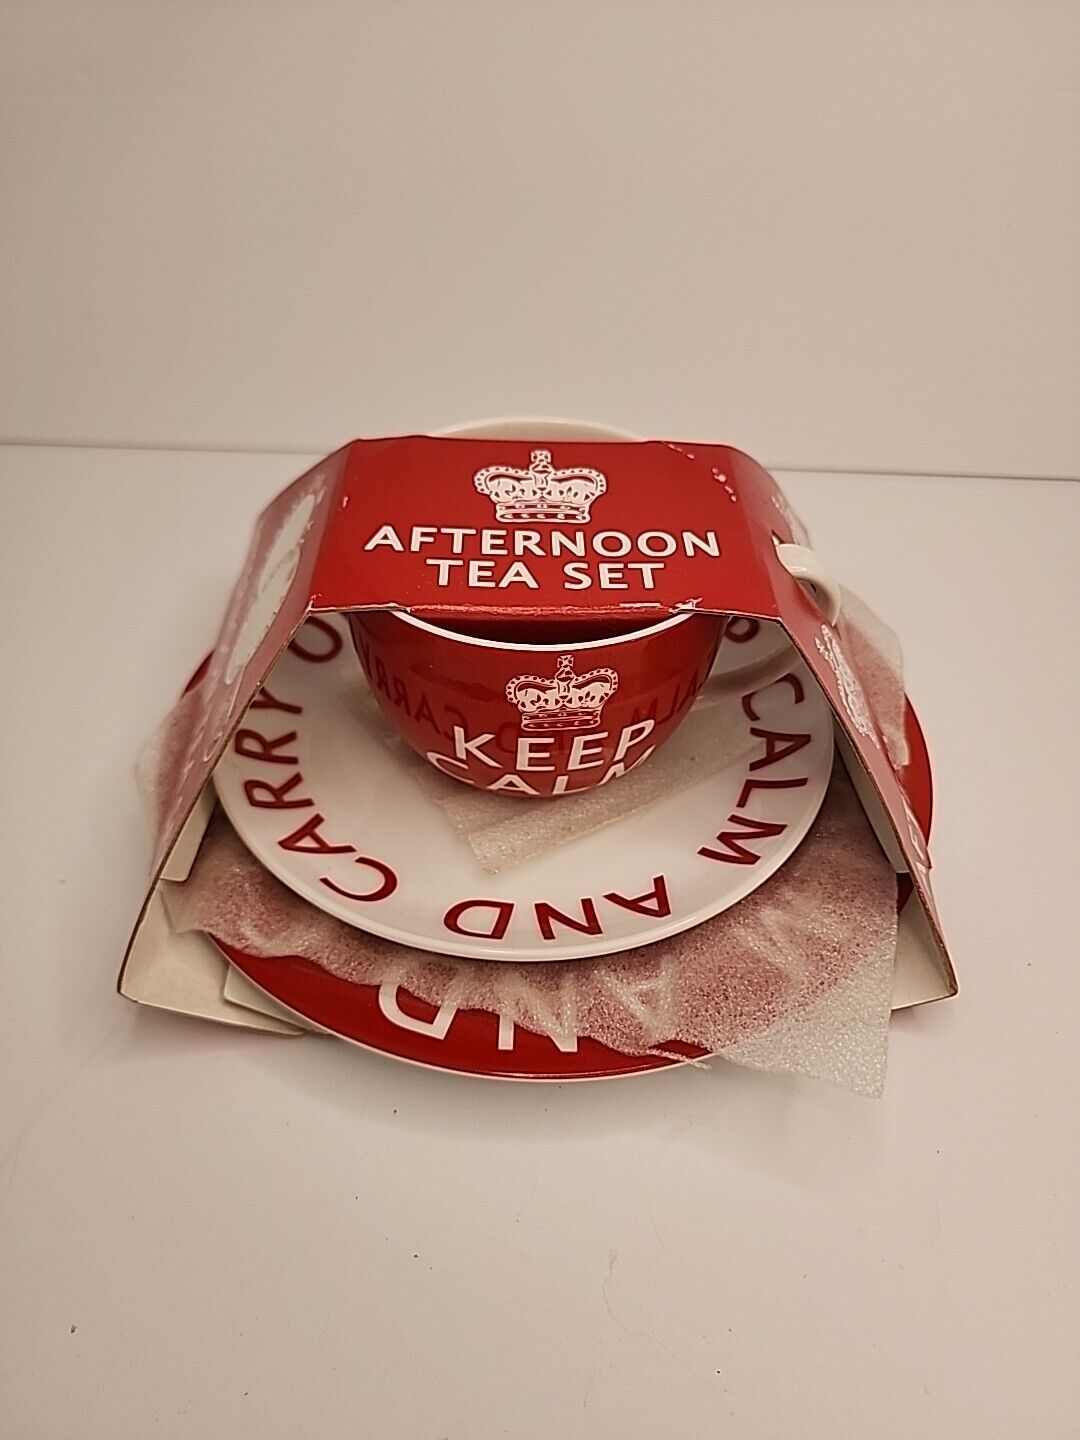 “Keep Calm And Carry On” Afternoon Tea Set by Creative Tops British Crown Cup